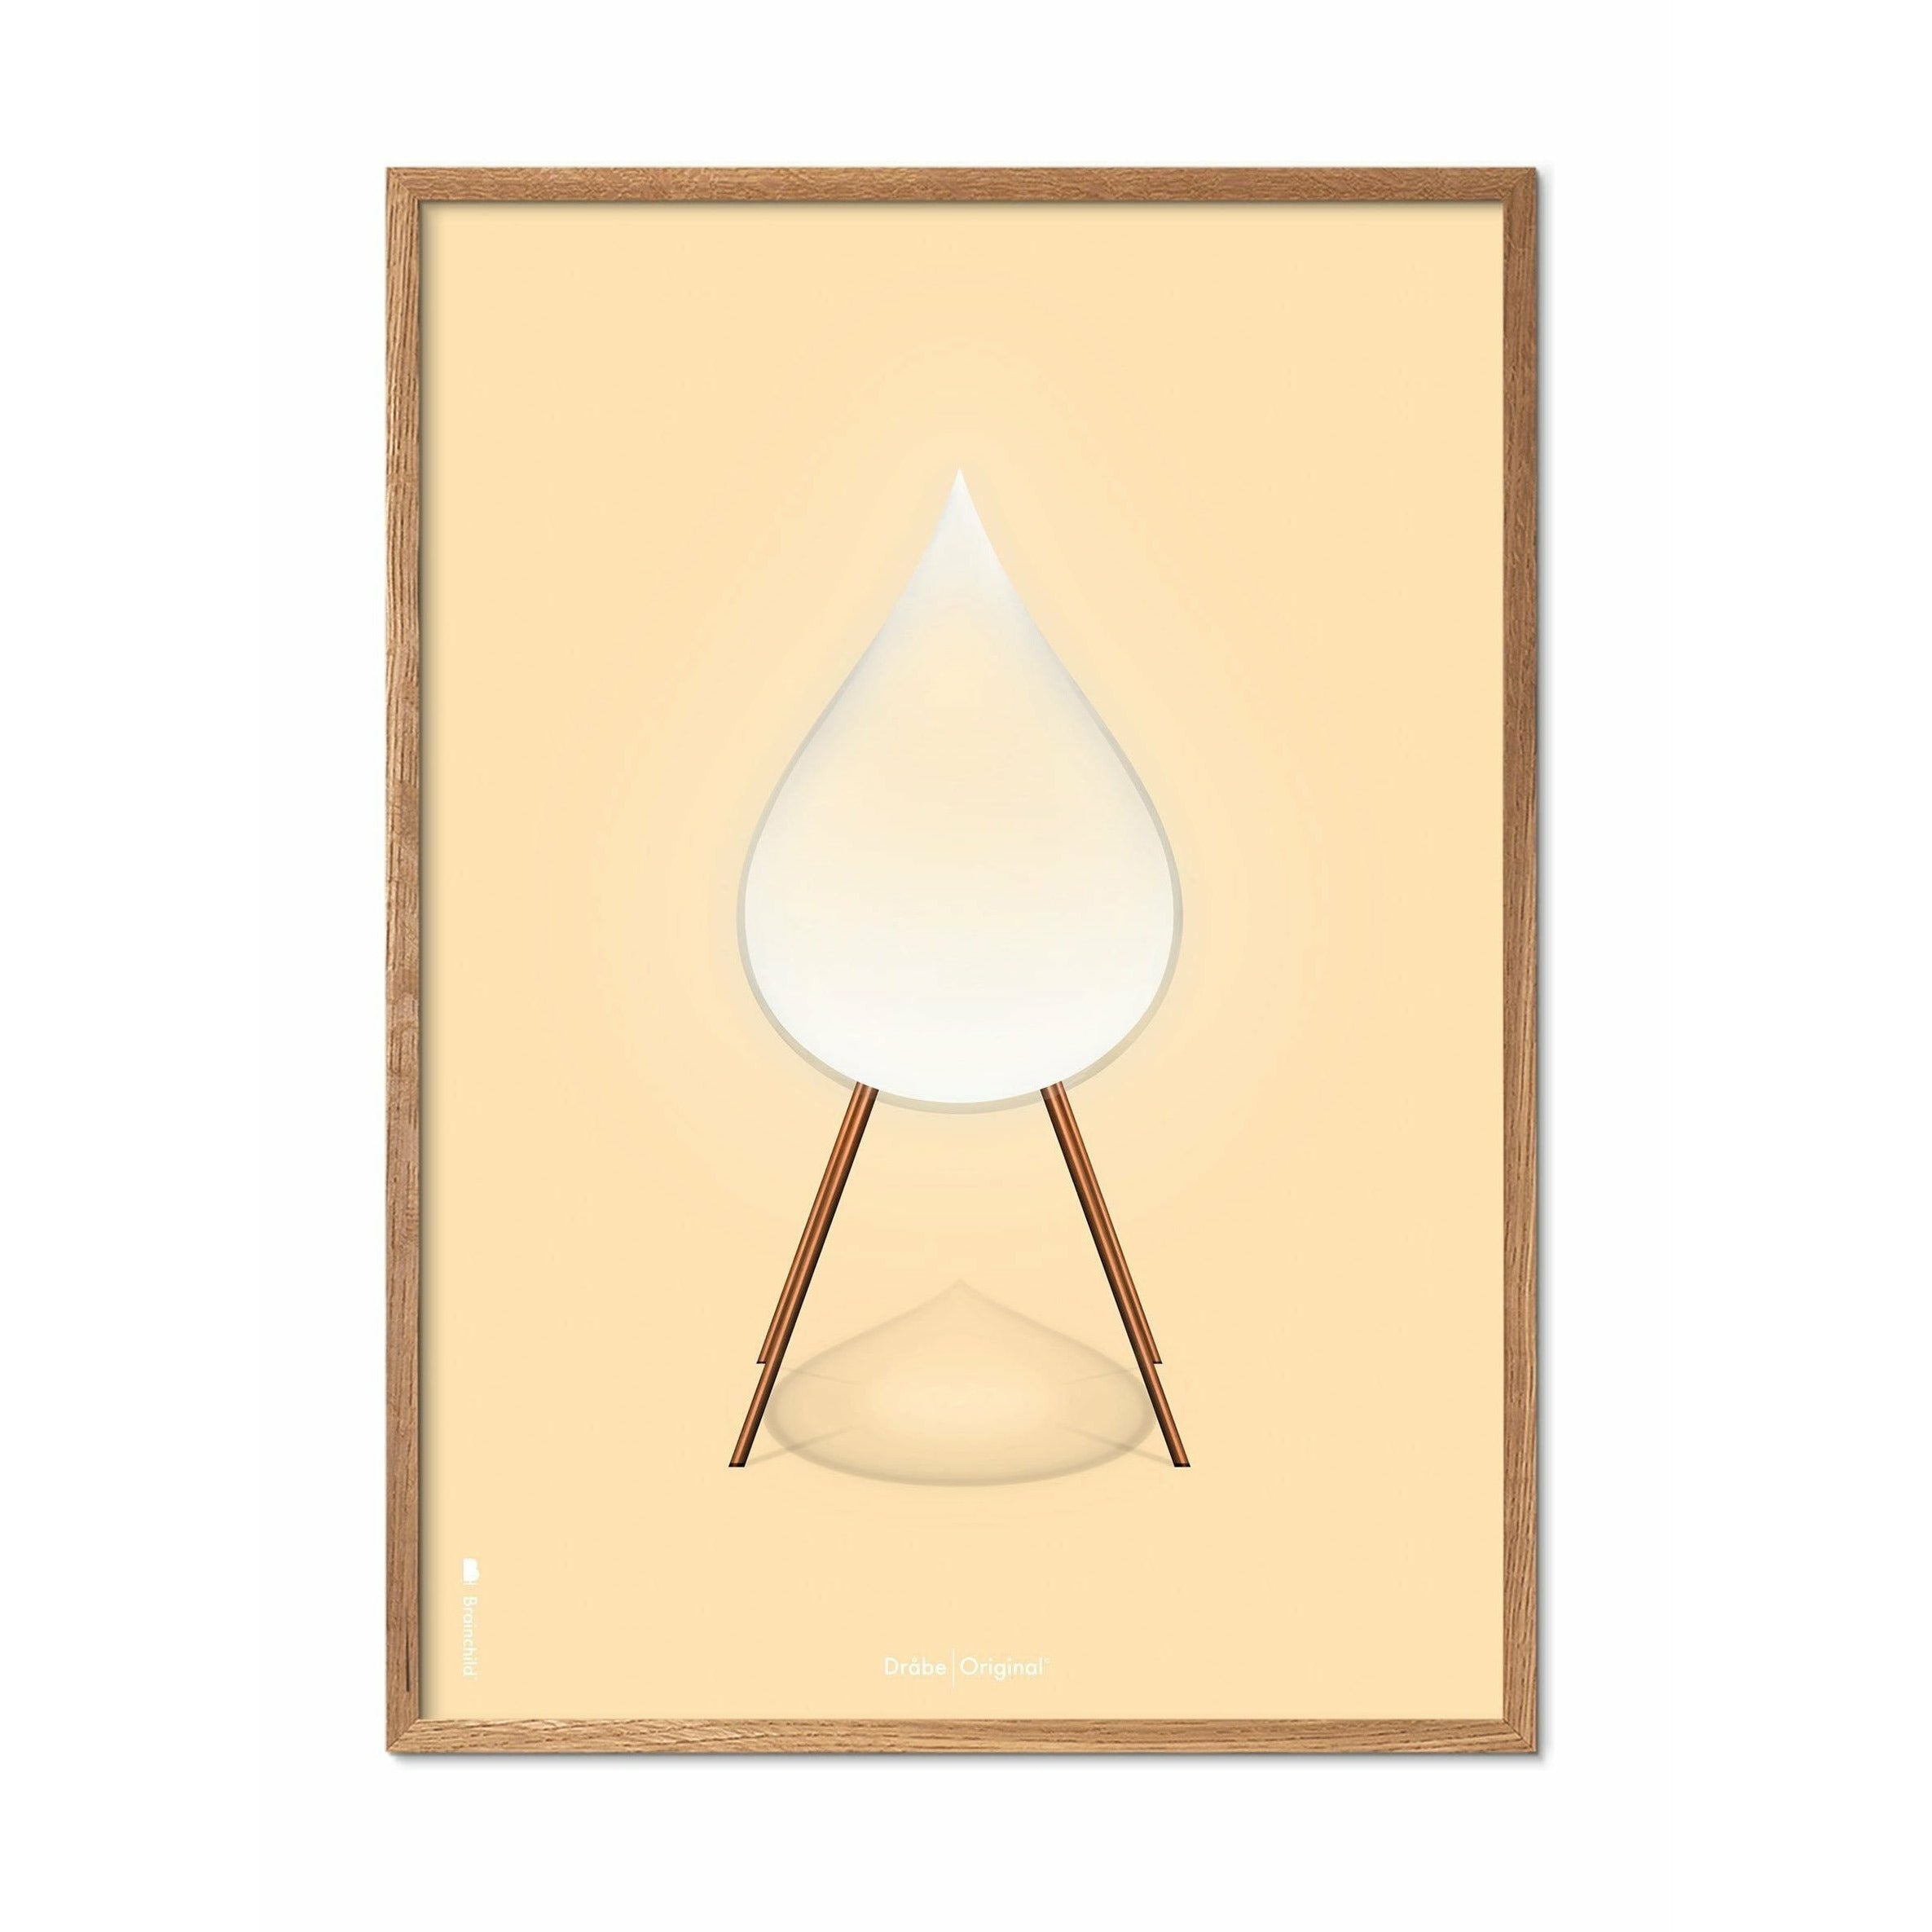 Brainchild Drop Classic Poster, Frame Made Of Light Wood 50x70 Cm, Sand Colored Background